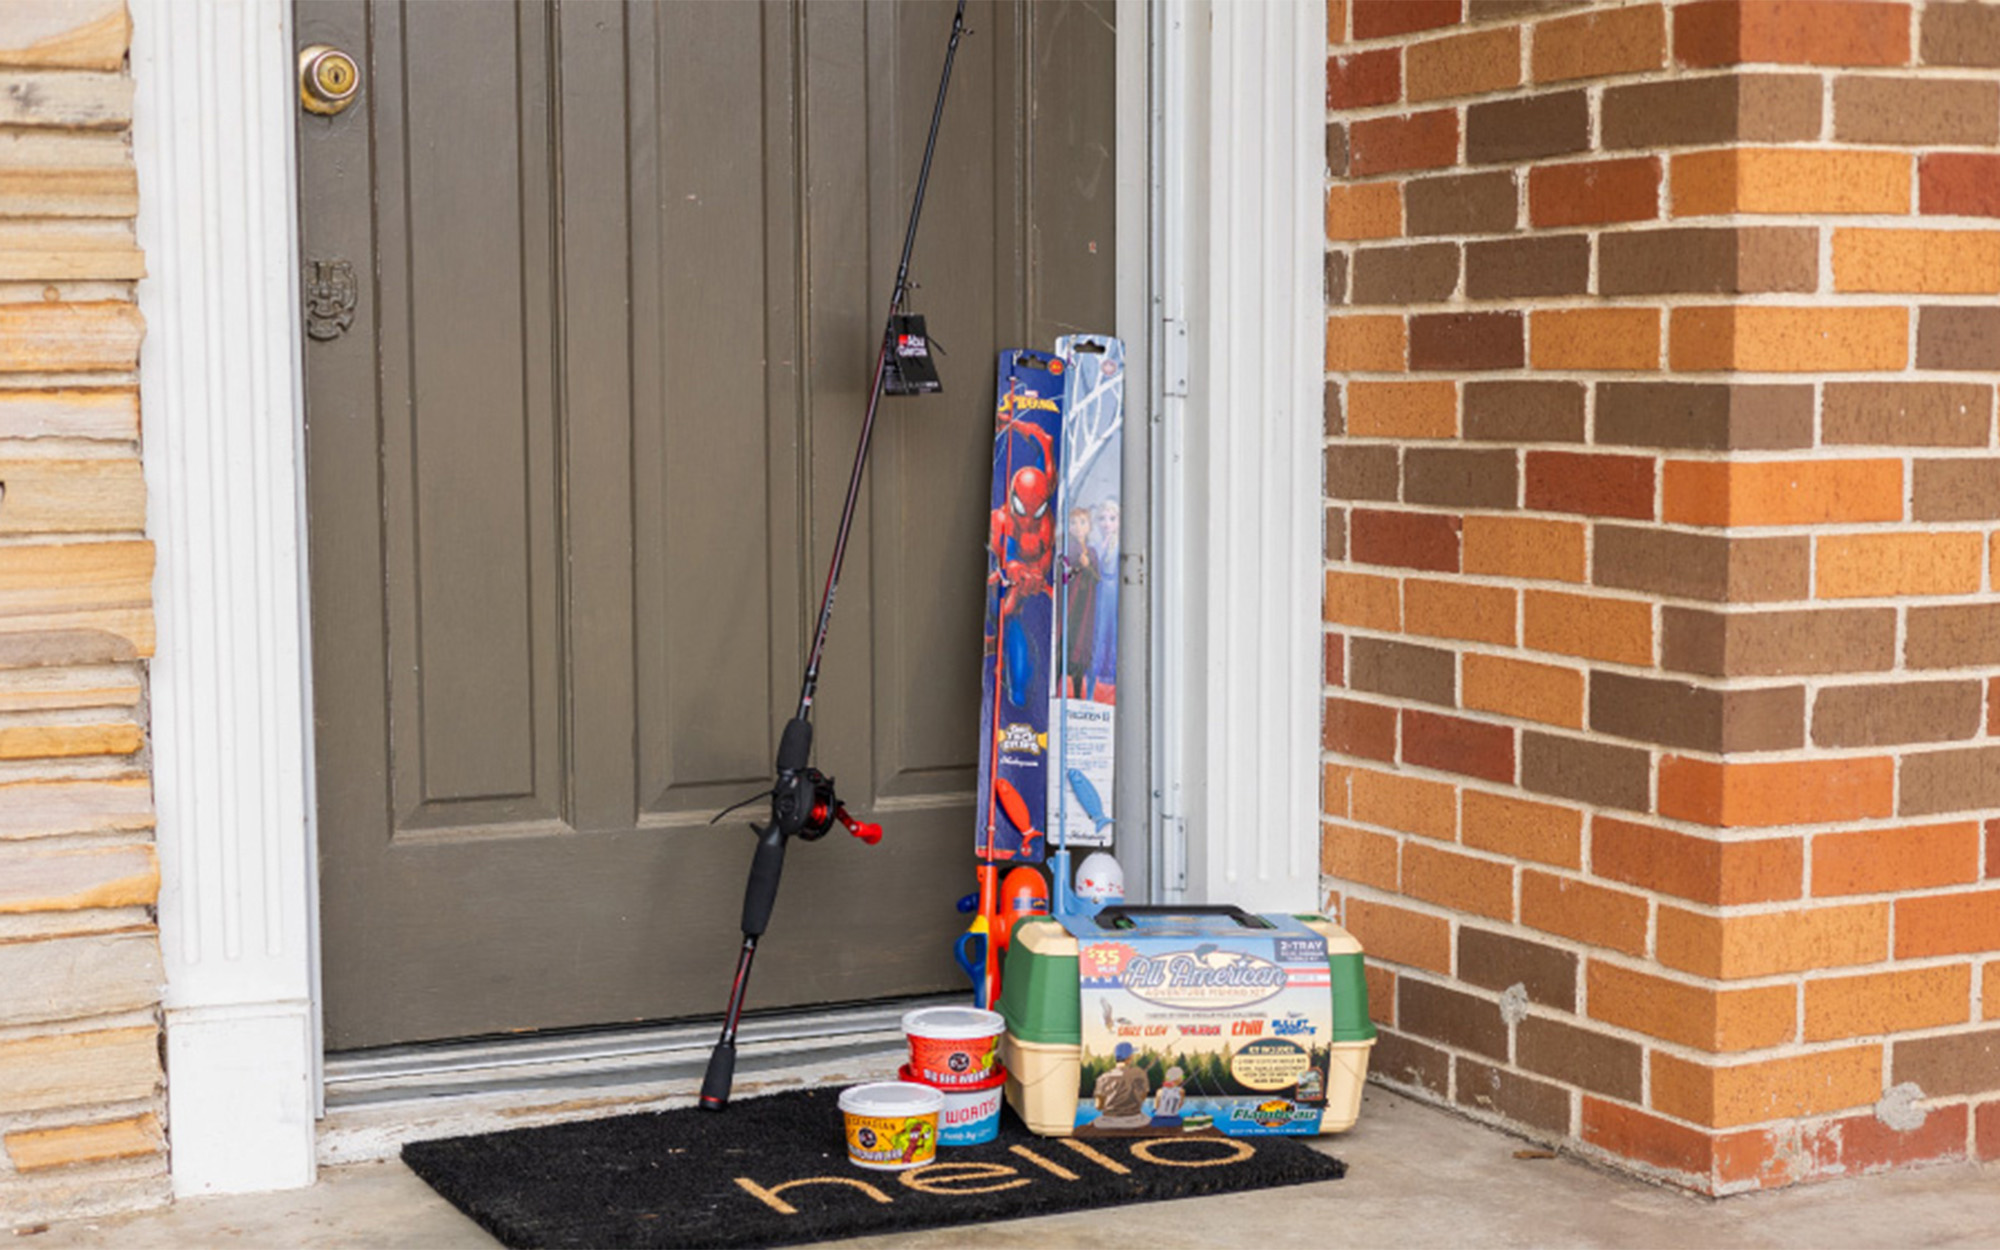 Walmart Now Delivering Live Bait Directly to Your Door